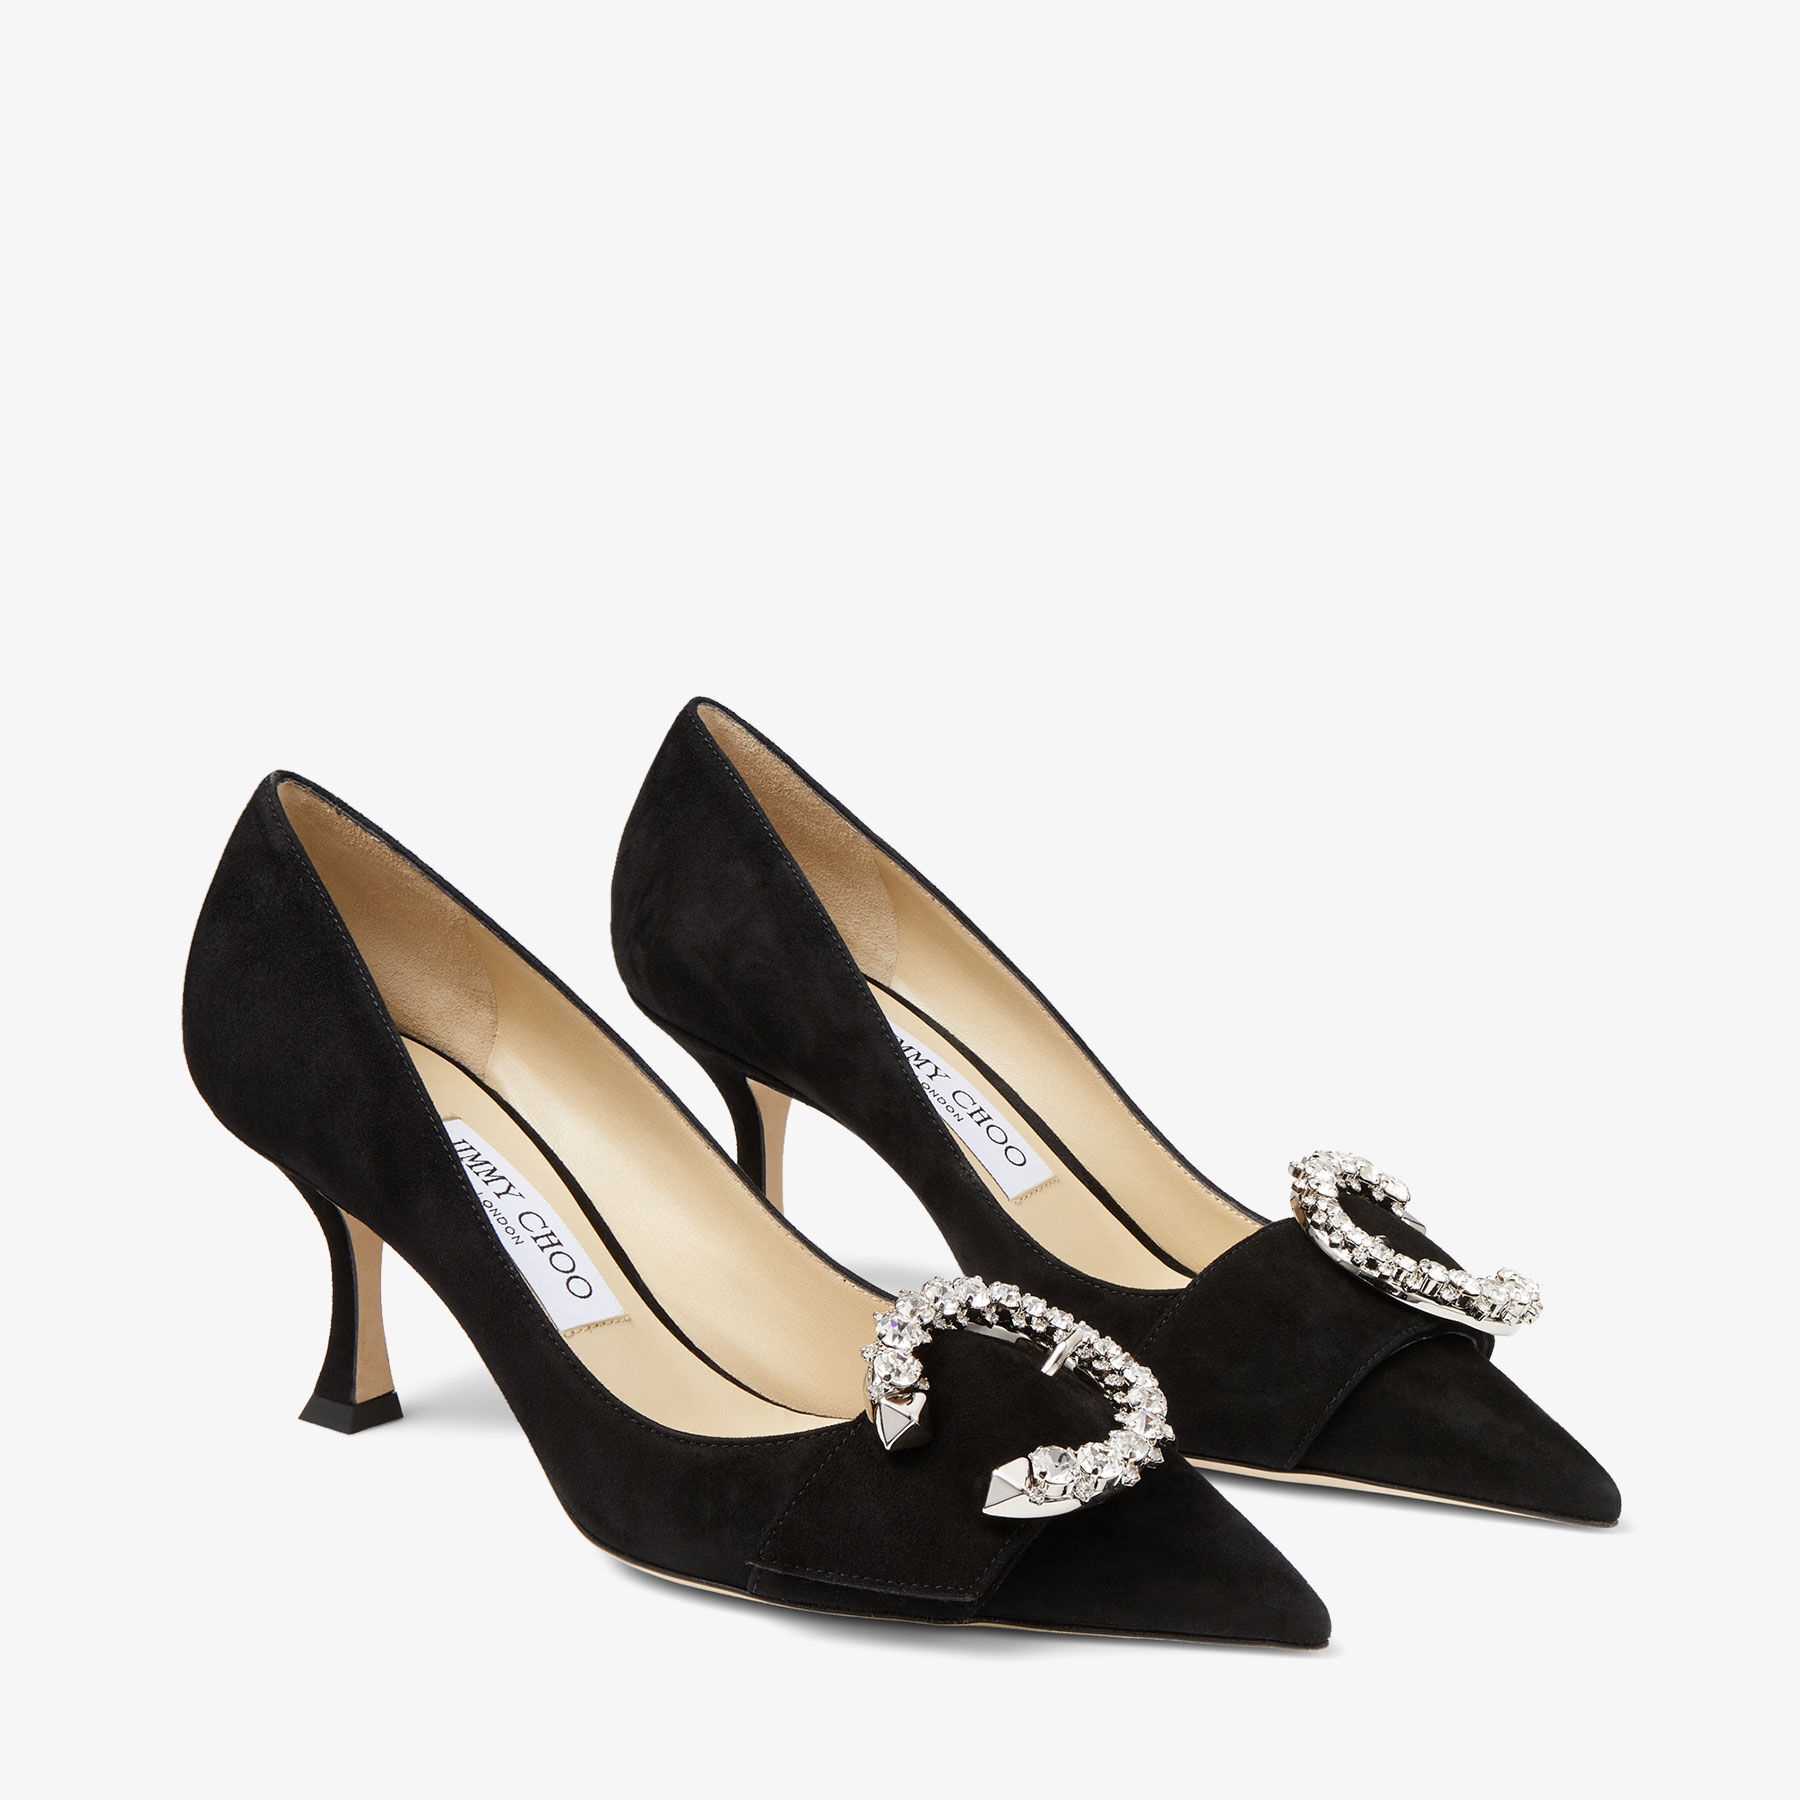 Melva 70
Black Suede Pointed-Toe Pumps with Crystal Buckle - 3